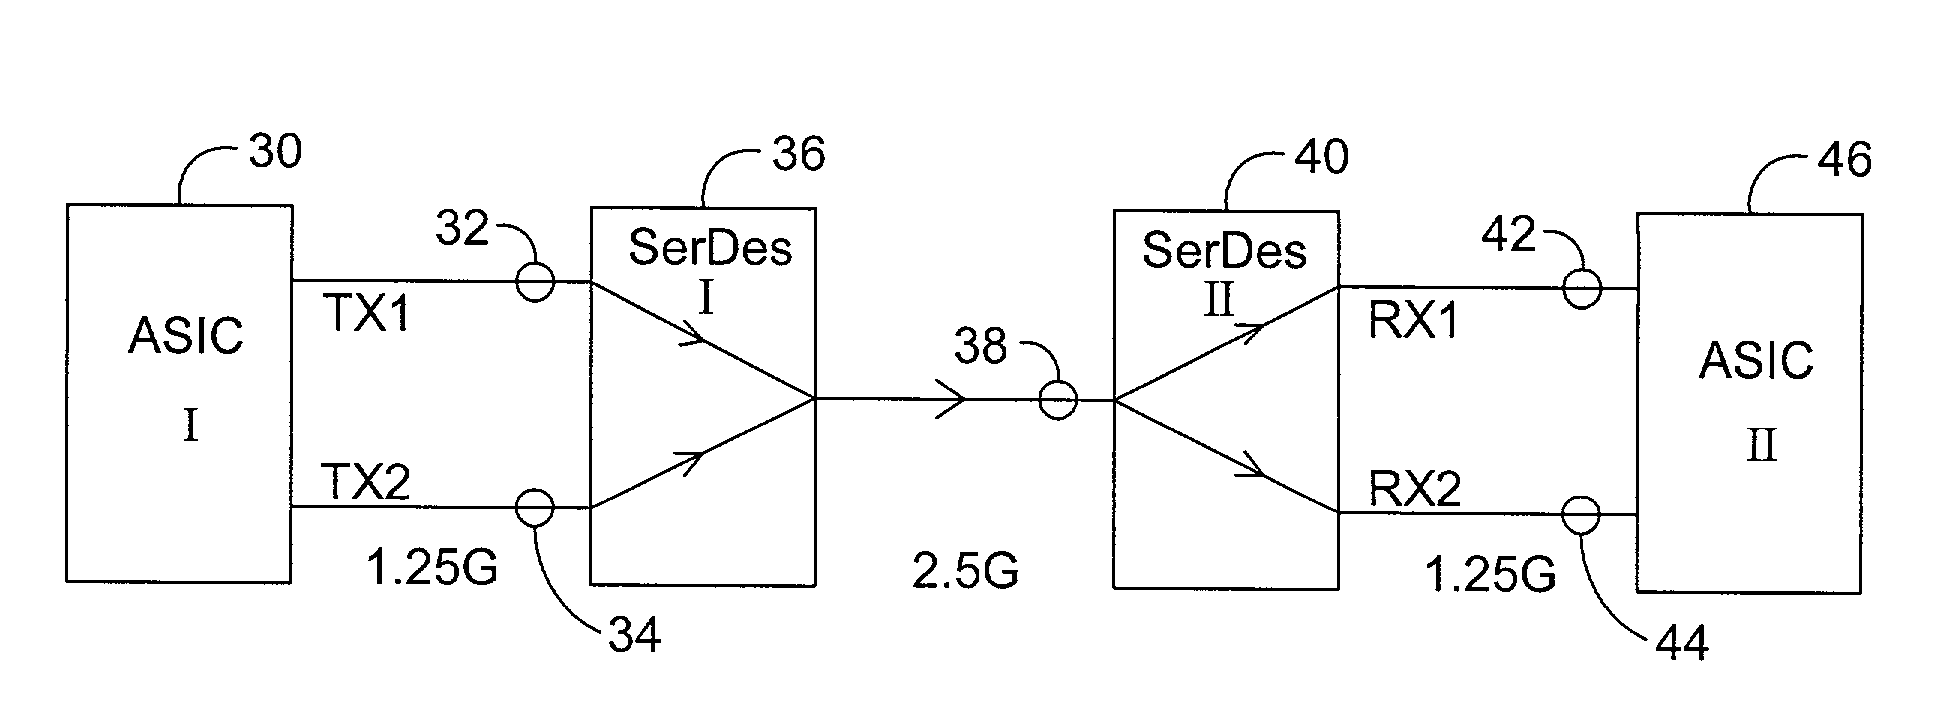 Apparatus and method for SerDes rate matching using symbol interleaving